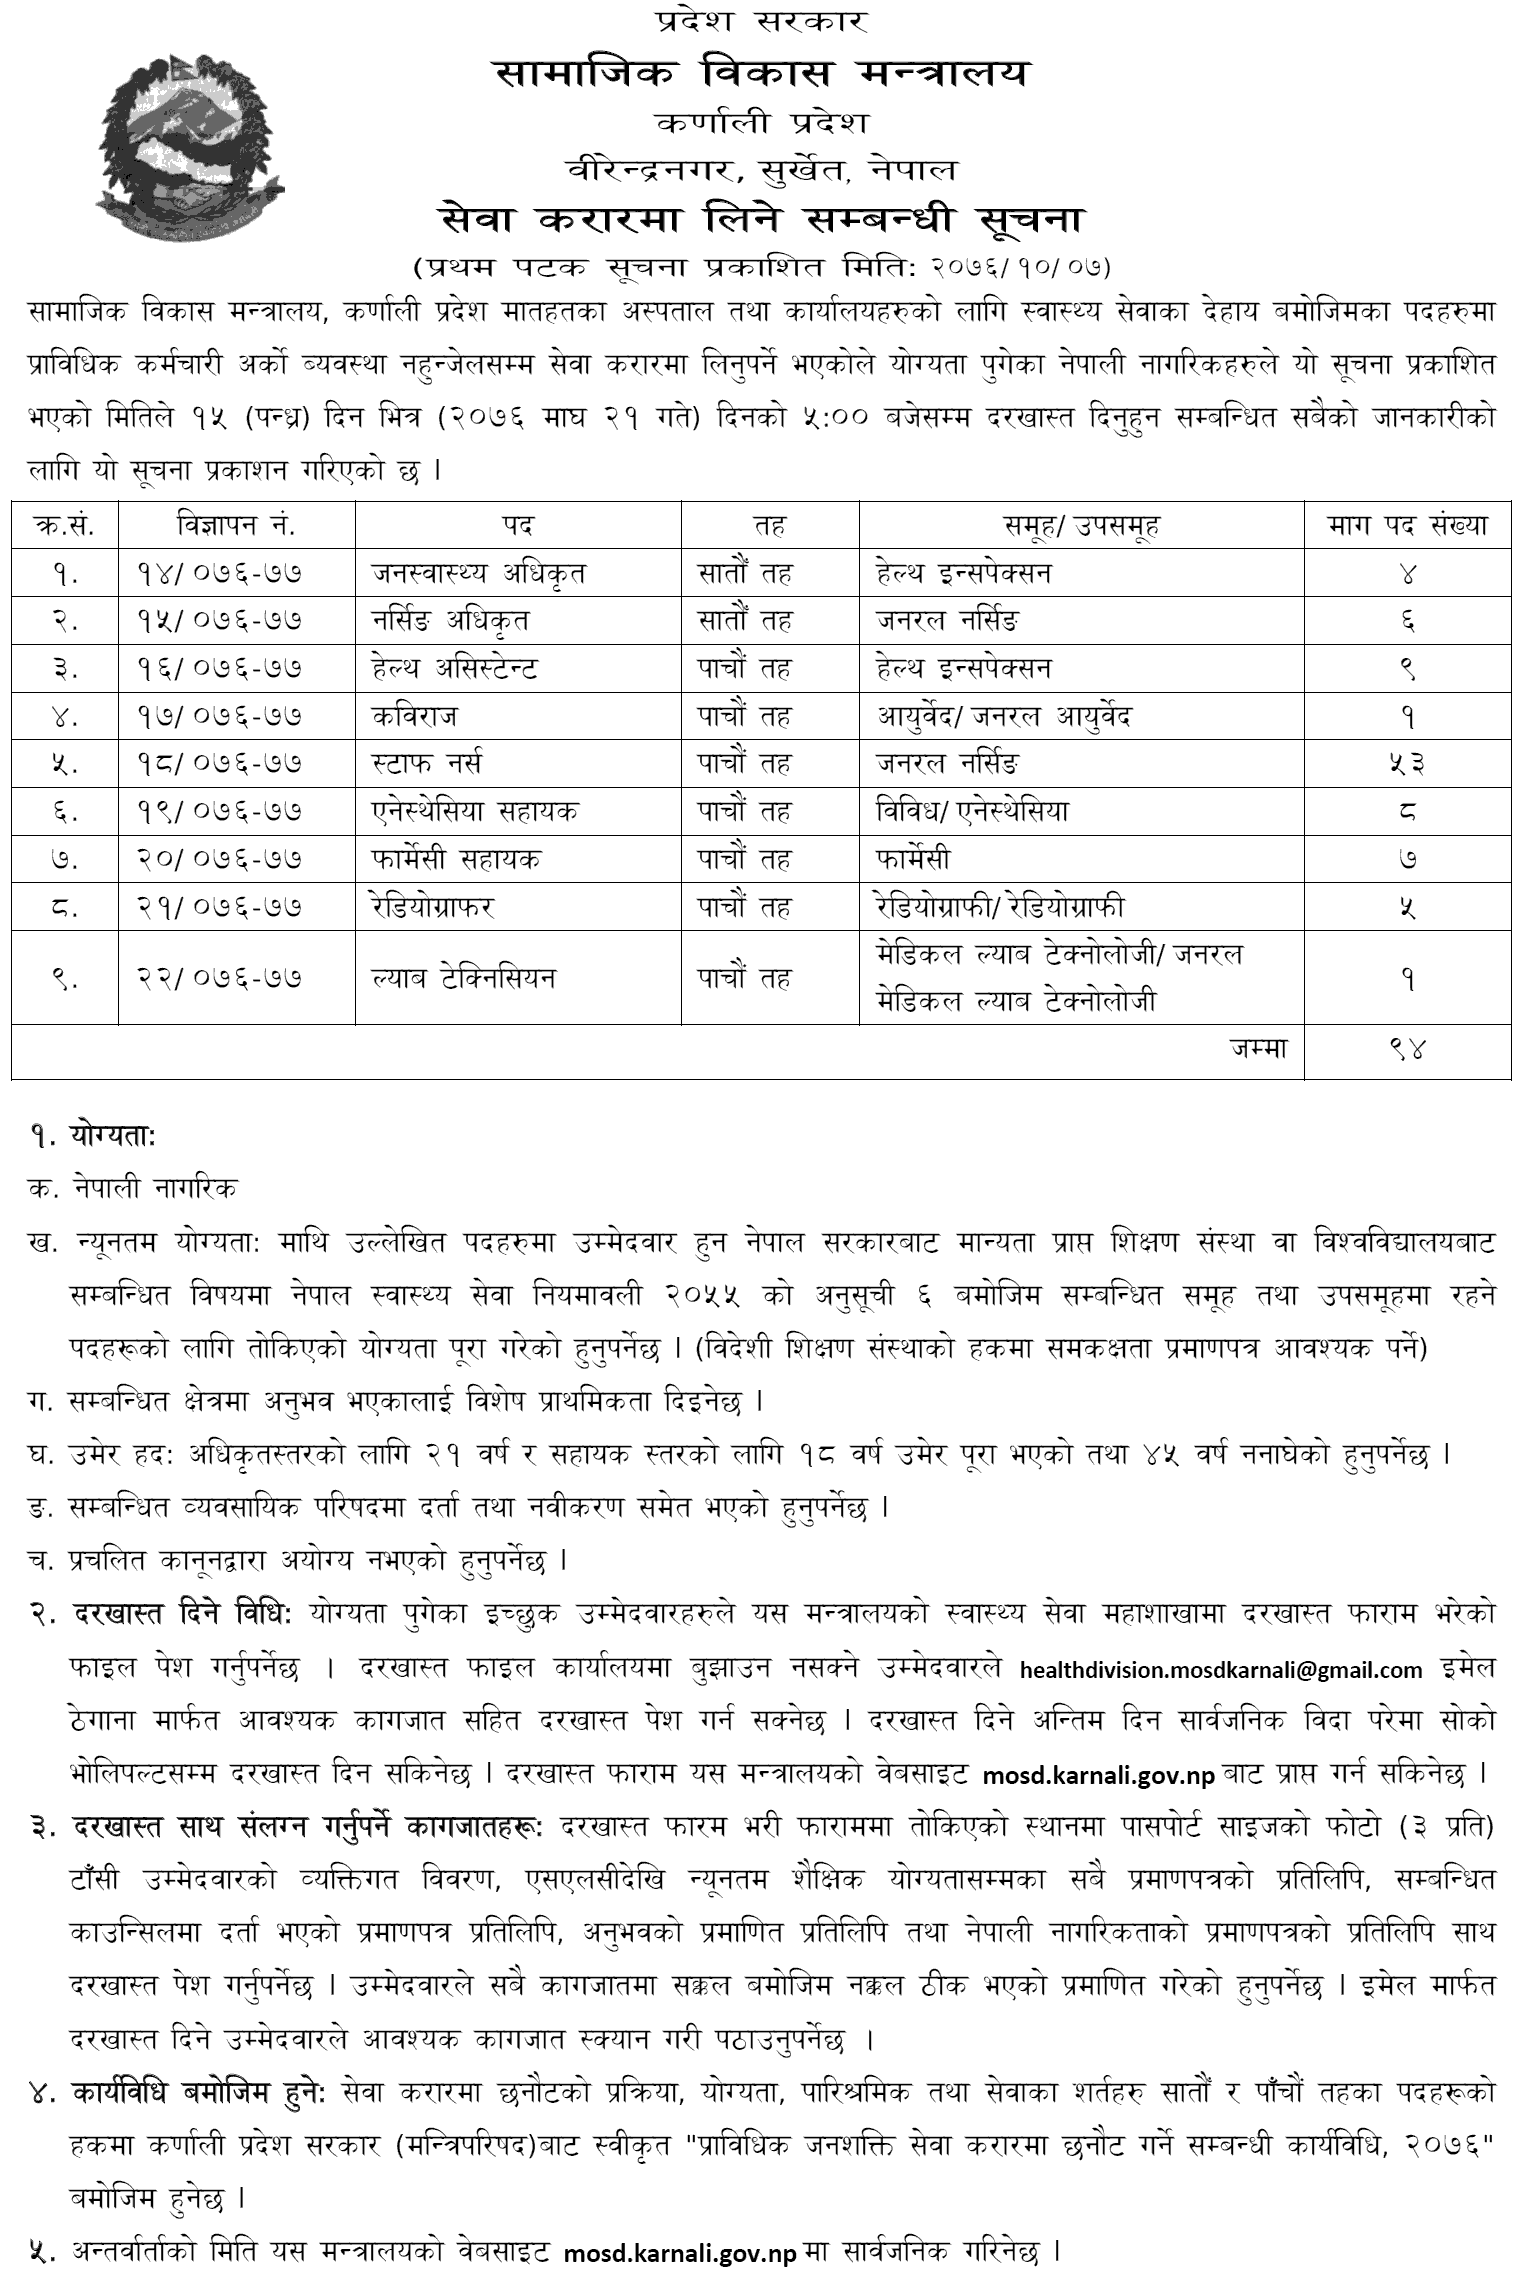 Ministry of Social Development, Karnali Province Vacancy for Health Services